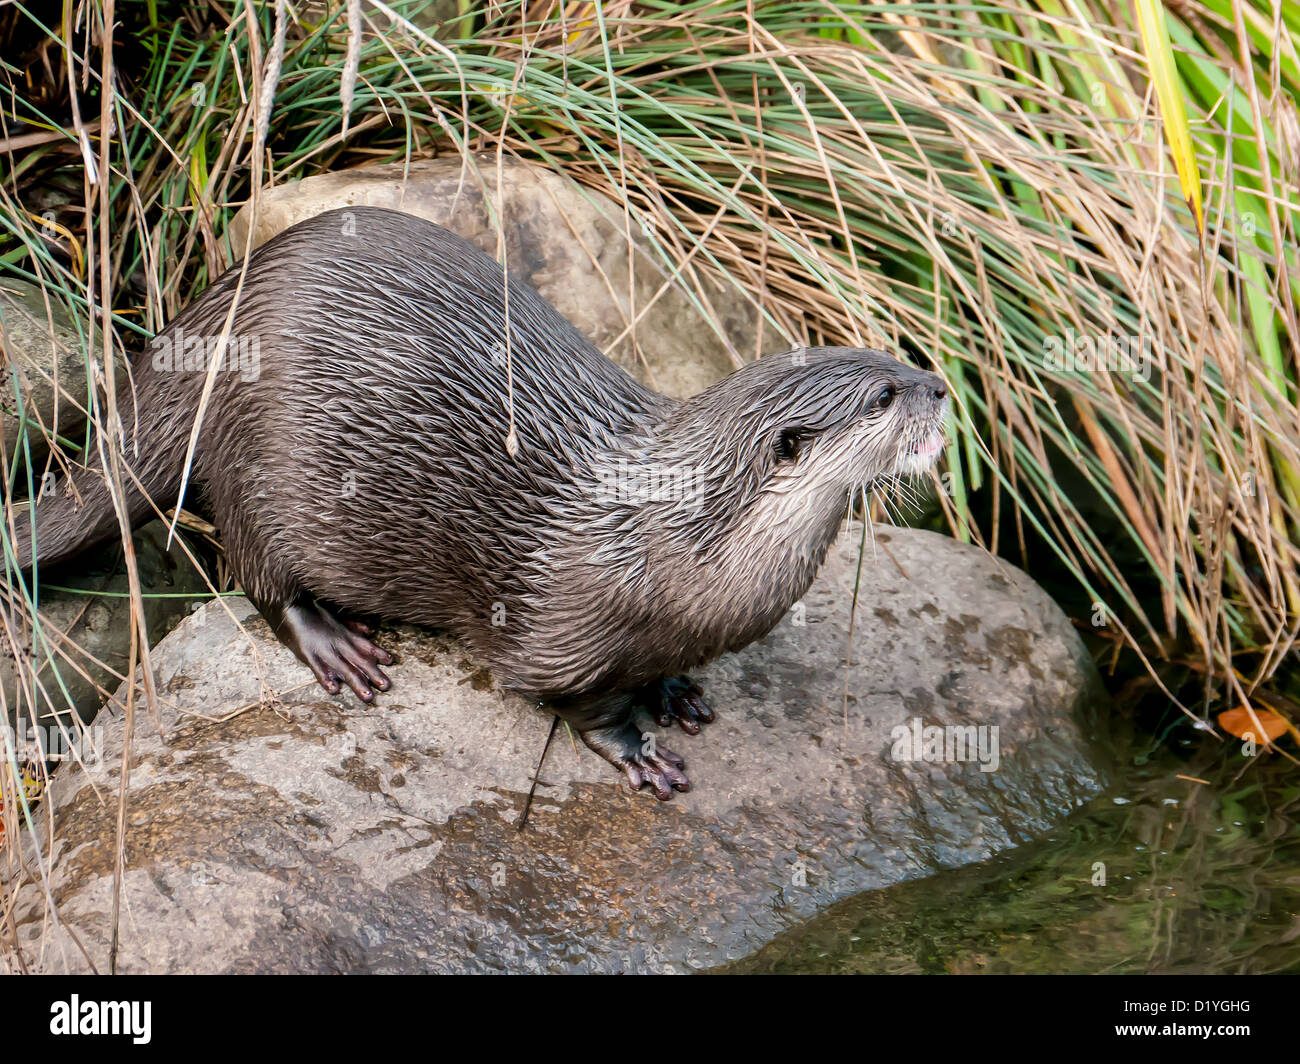 Grey Asian short-clawed otter among the reeds at London Wetlands, UK Stock Photo